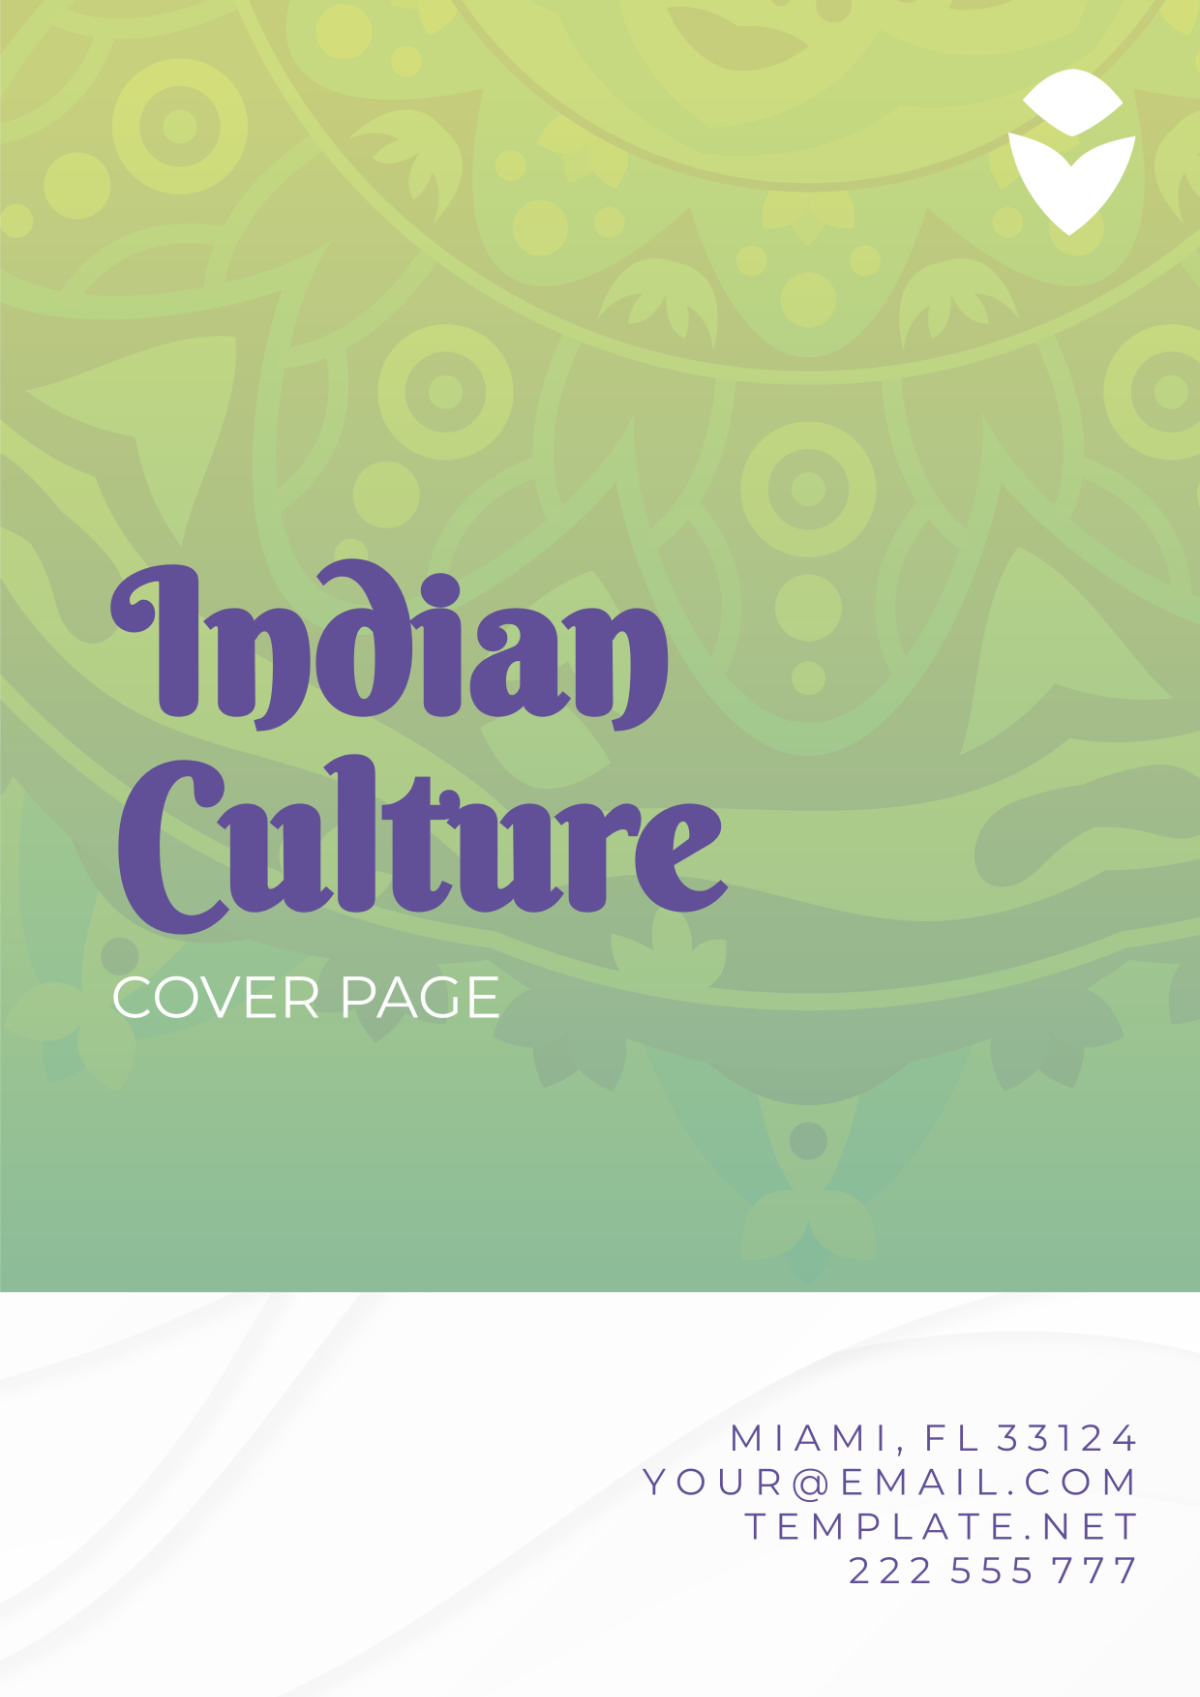 Indian Culture Cover Page